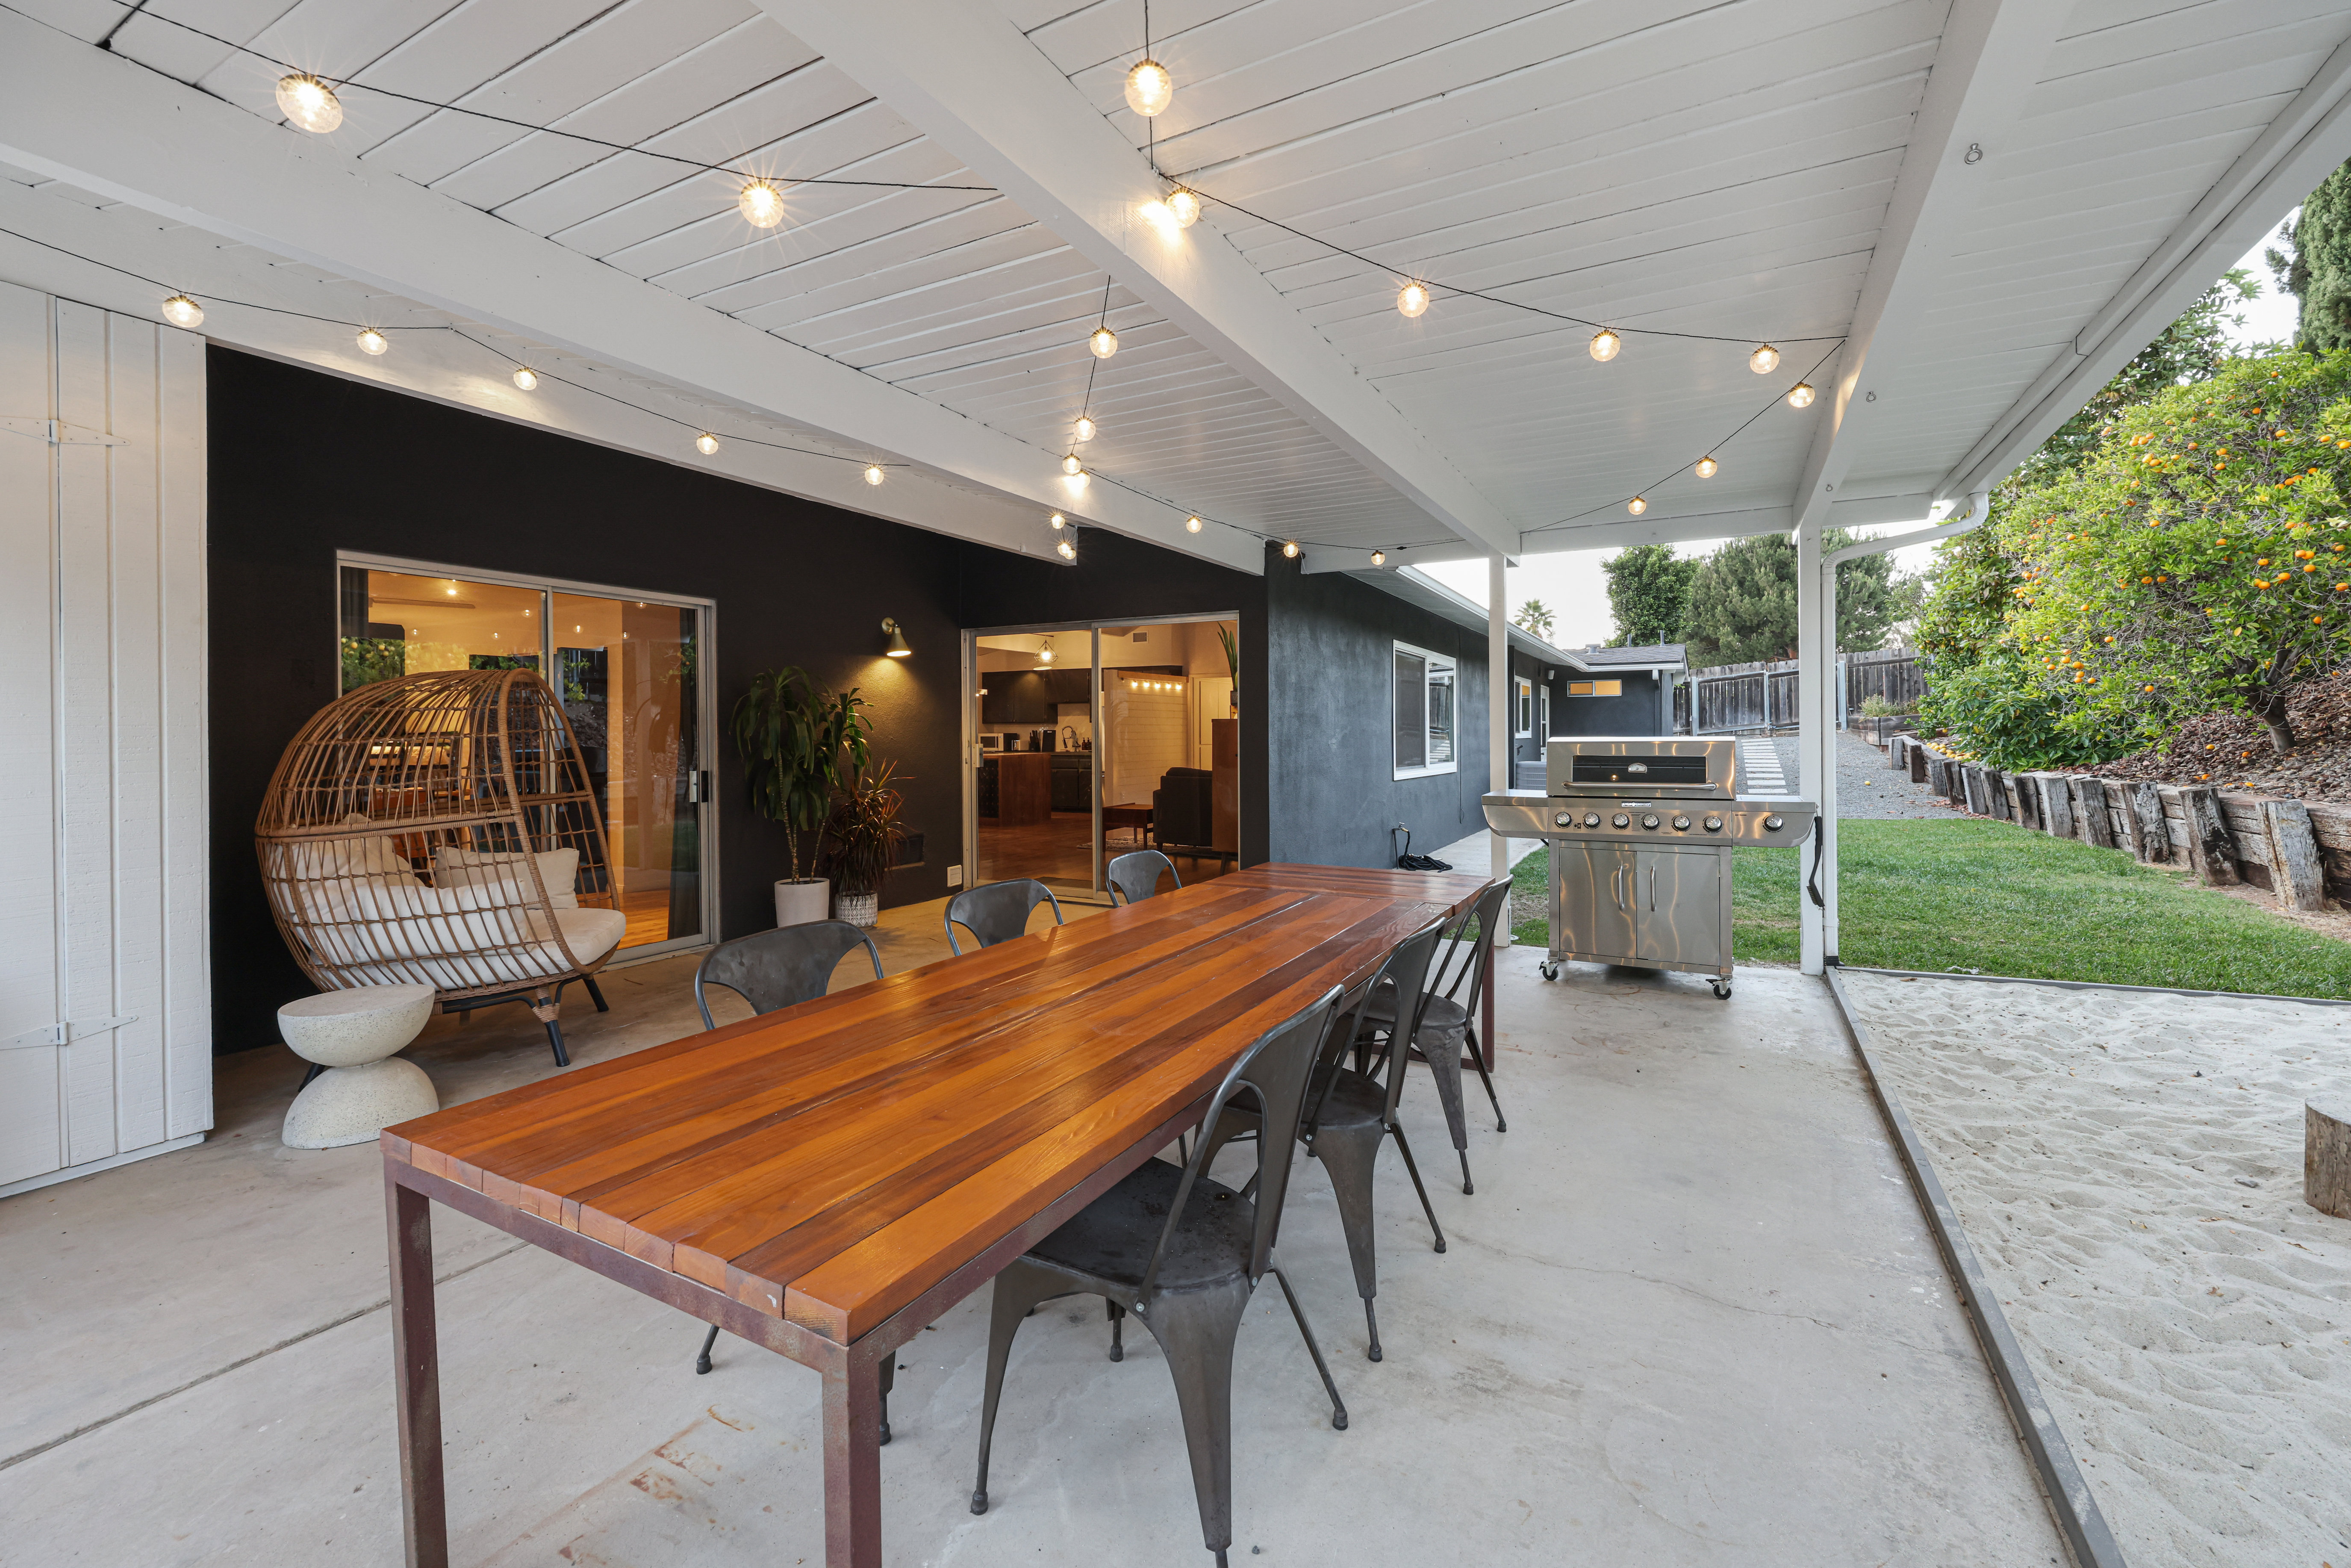 Patio with covered dining table and chairs, a BBQ Grill and loungers